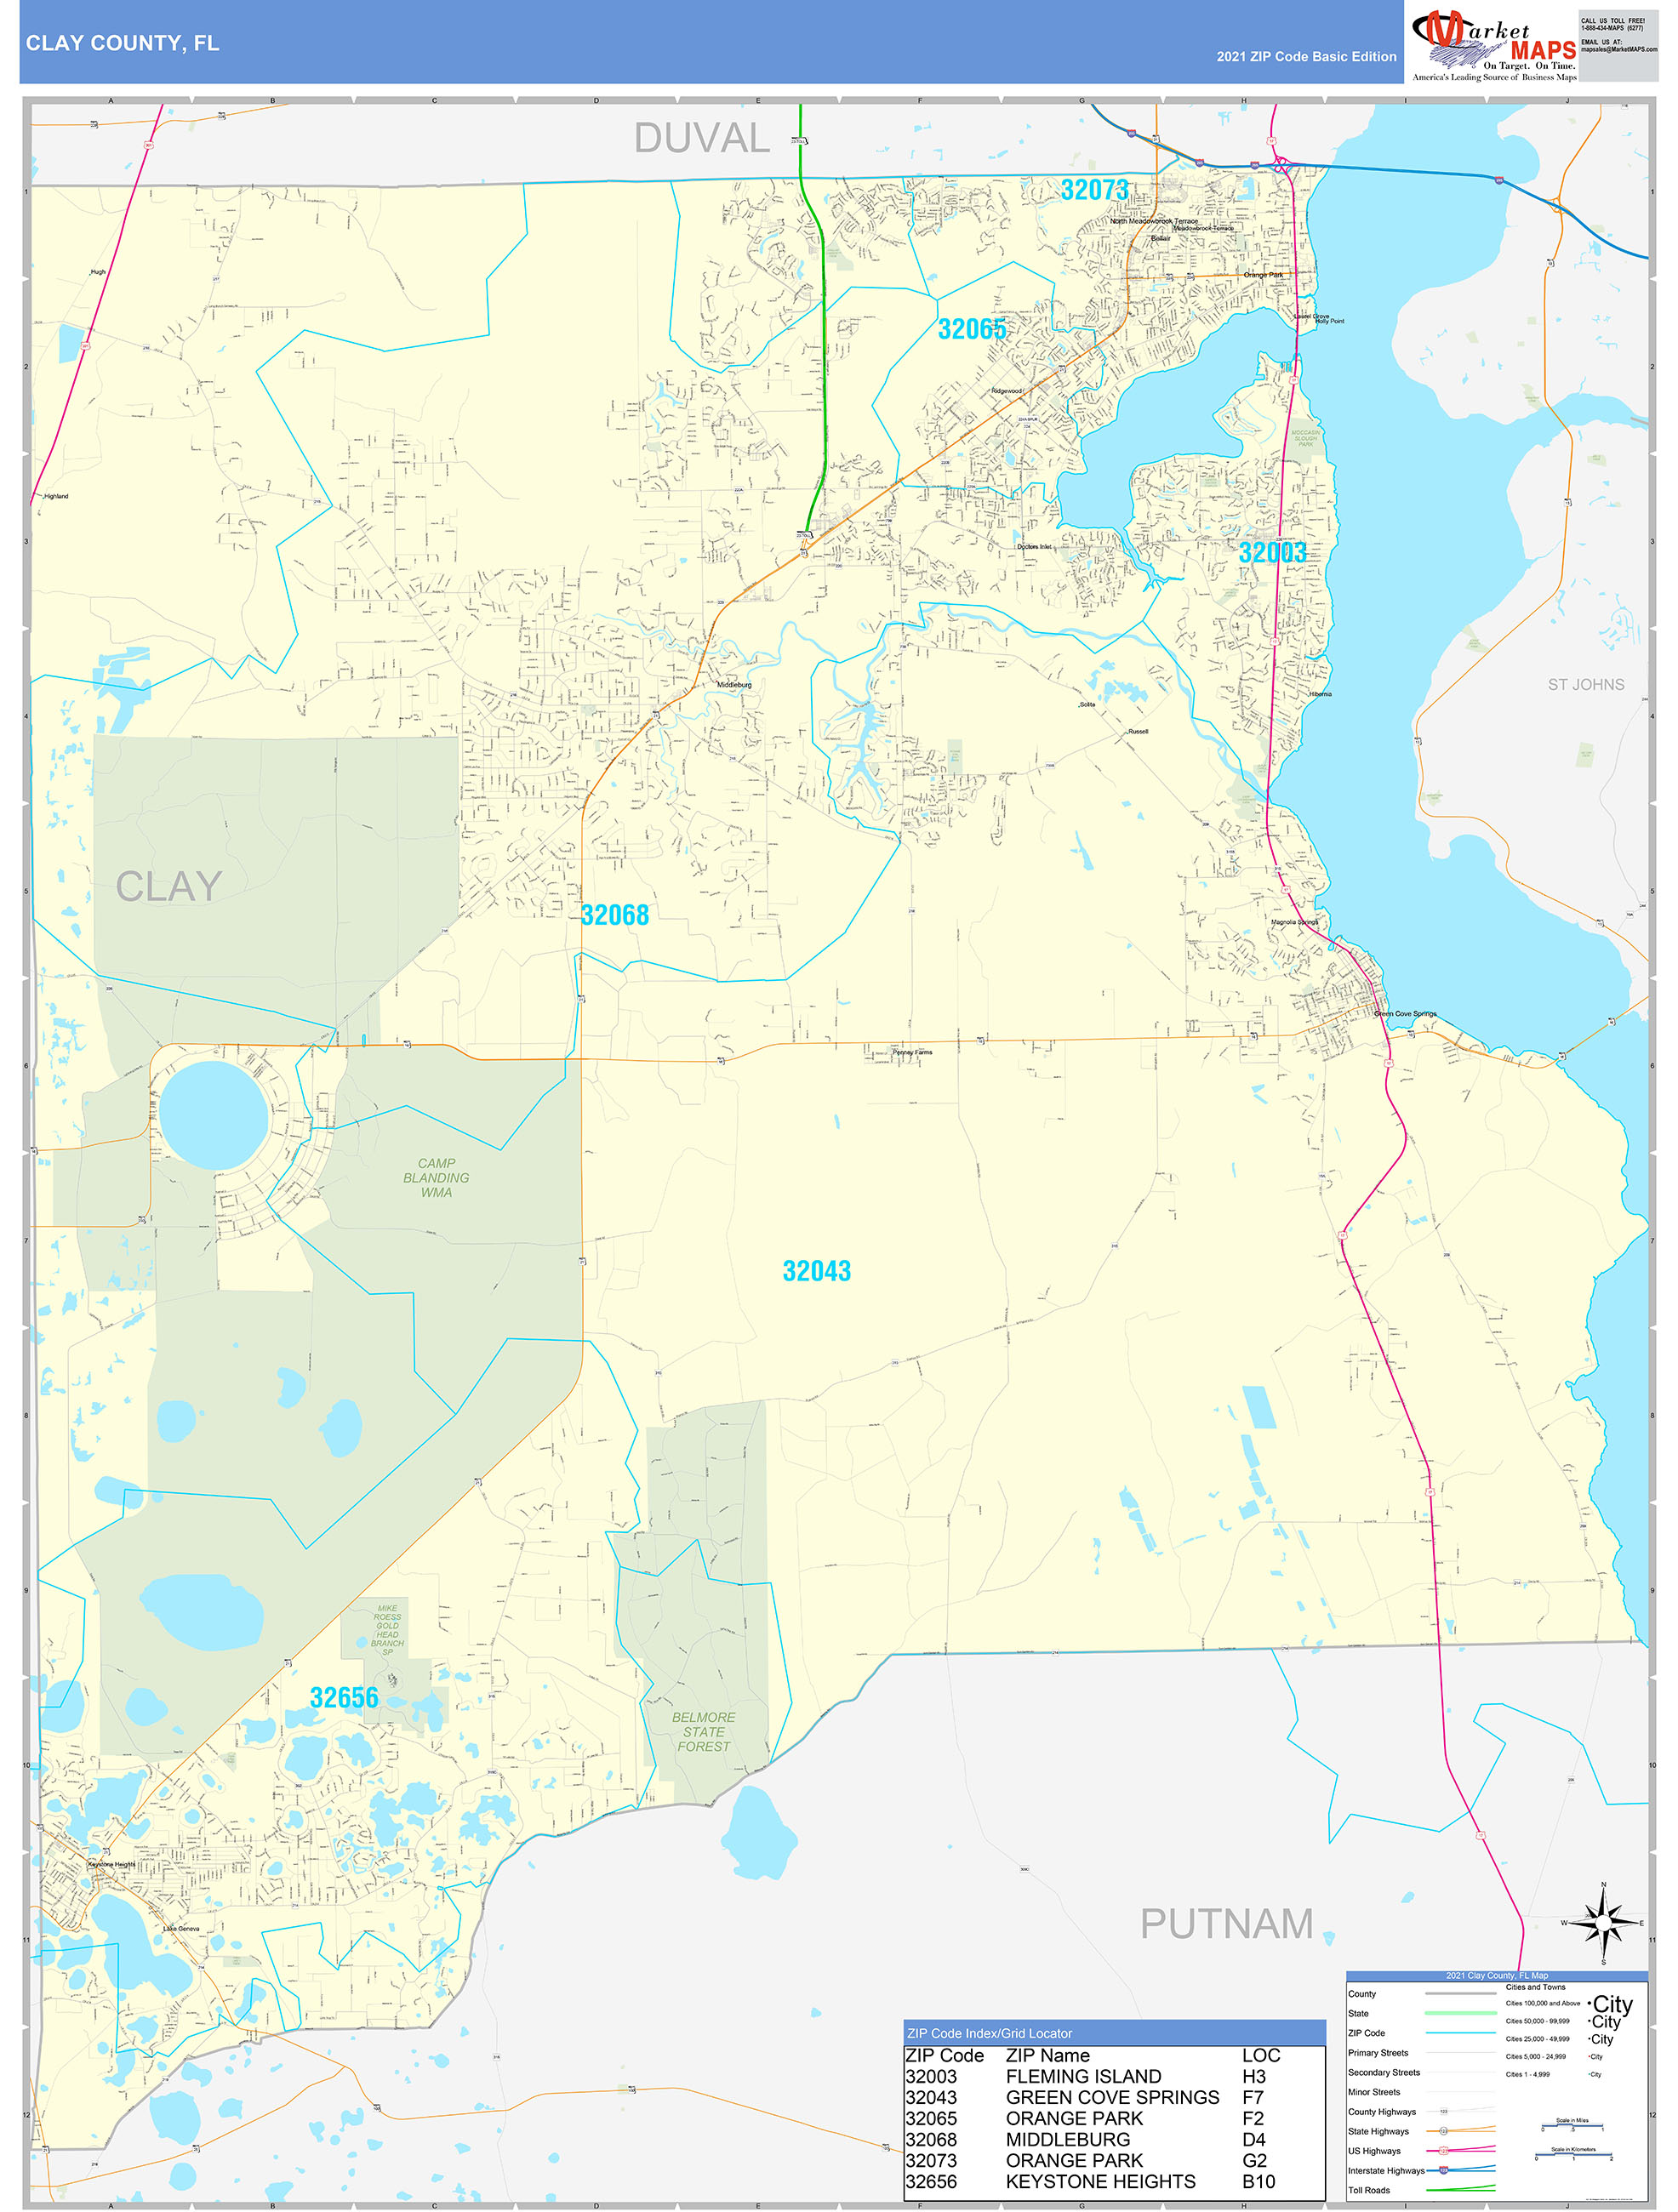 Clay County, FL Zip Code Wall Map Basic Style by MarketMAPS MapSales